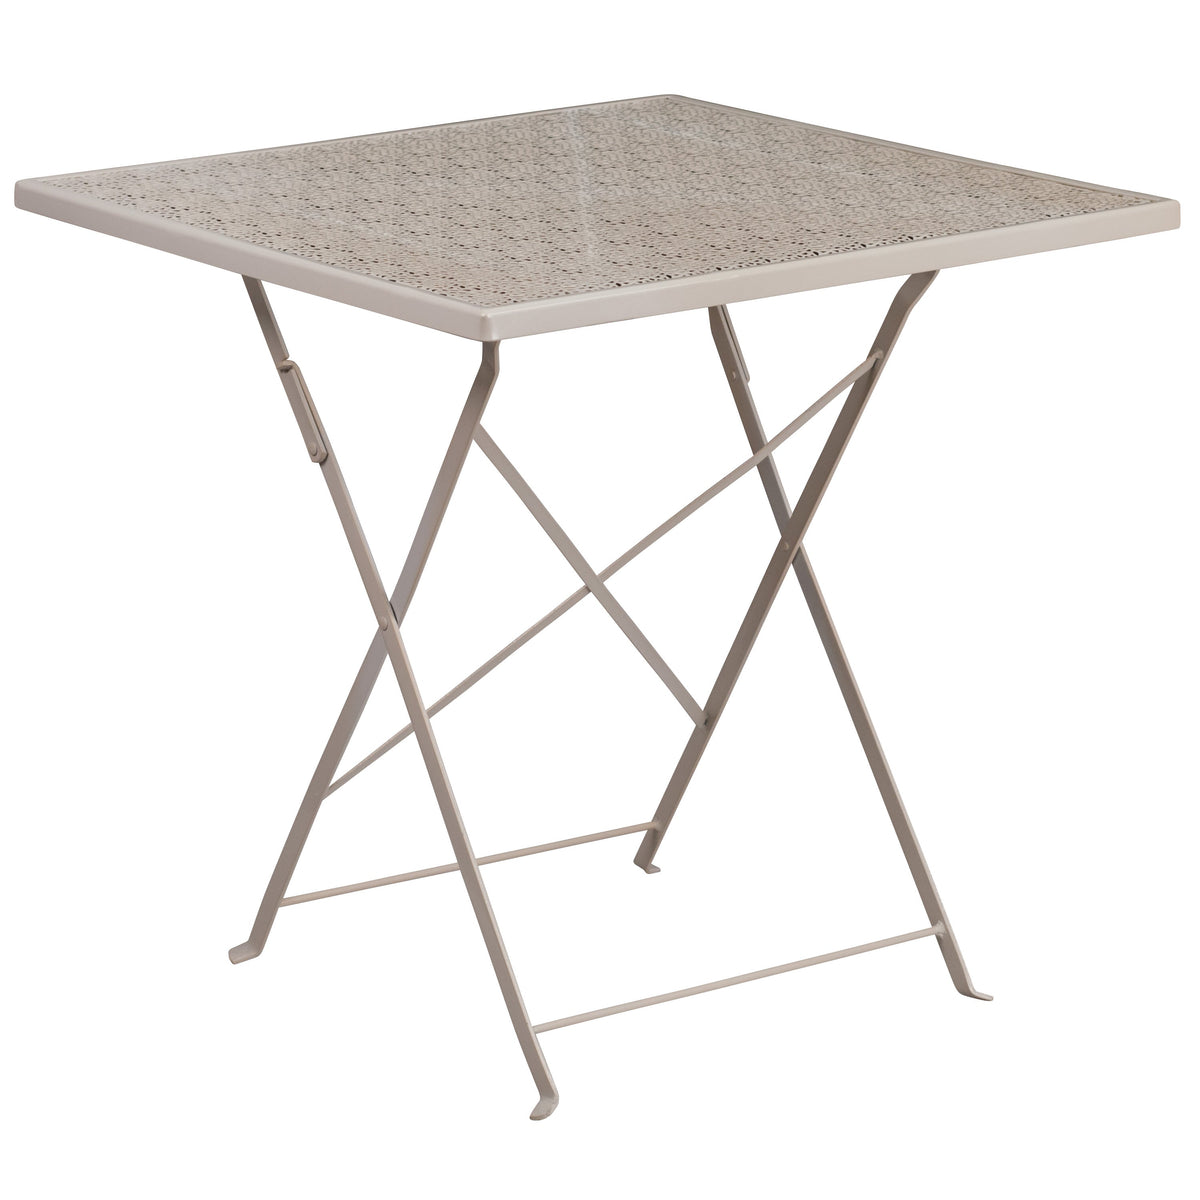 Light Gray |#| 28inch Square Lt Gray Indoor-Outdoor Steel Folding Patio Table Set with 4 Chairs